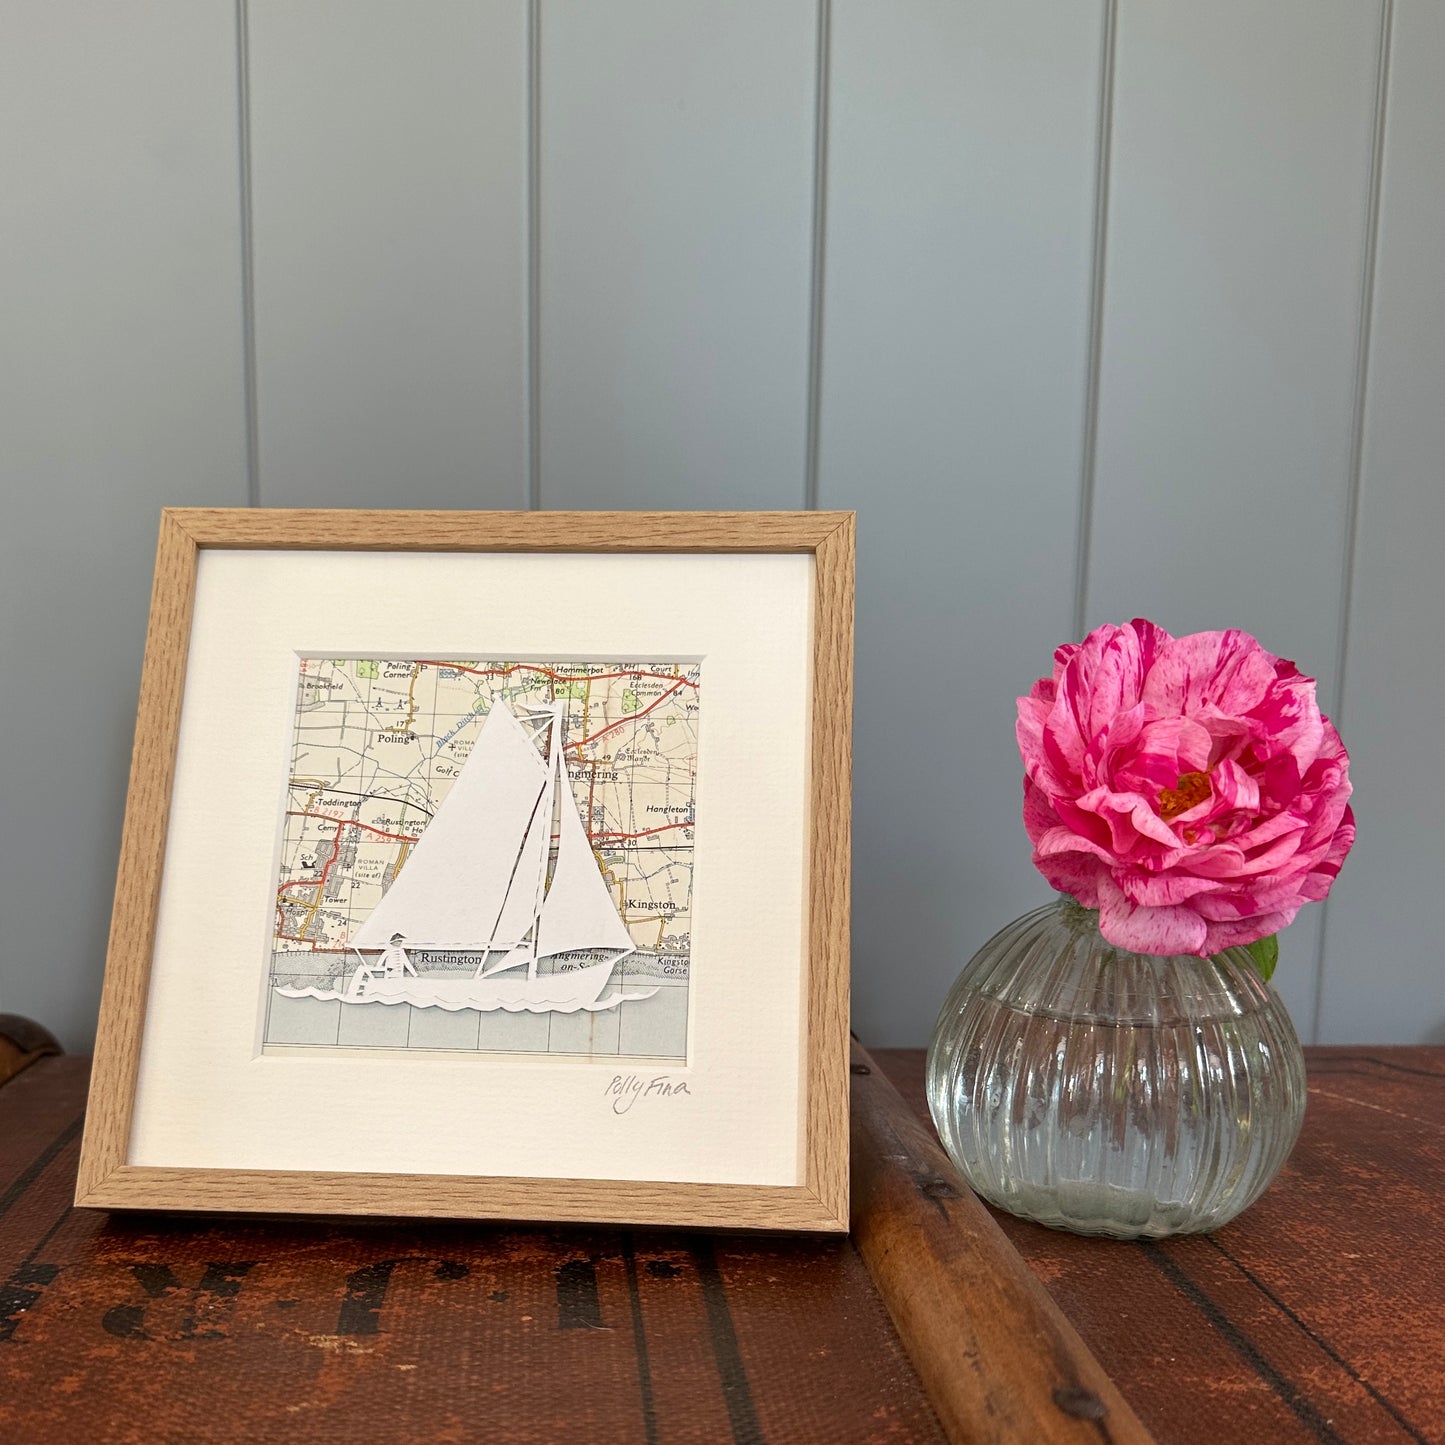 Papercut of sailing dinghy over an OS map extract in wood effect frame next to flower for scale